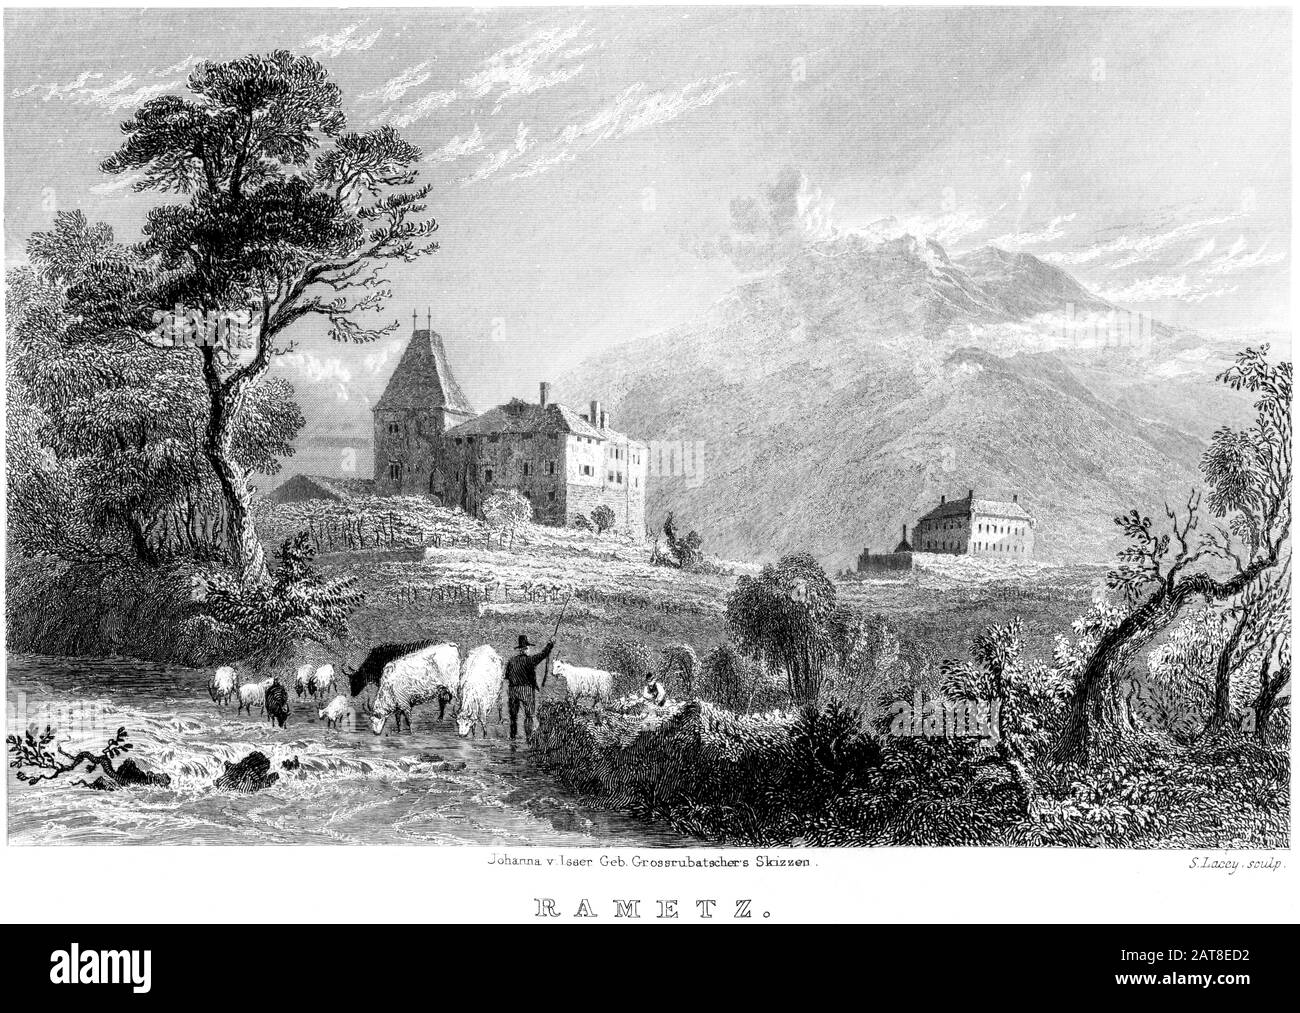 An engraving of Rametz scanned at high resolution from a book printed in 1836. This image is believed to be free of all copyright restrictions. Stock Photo